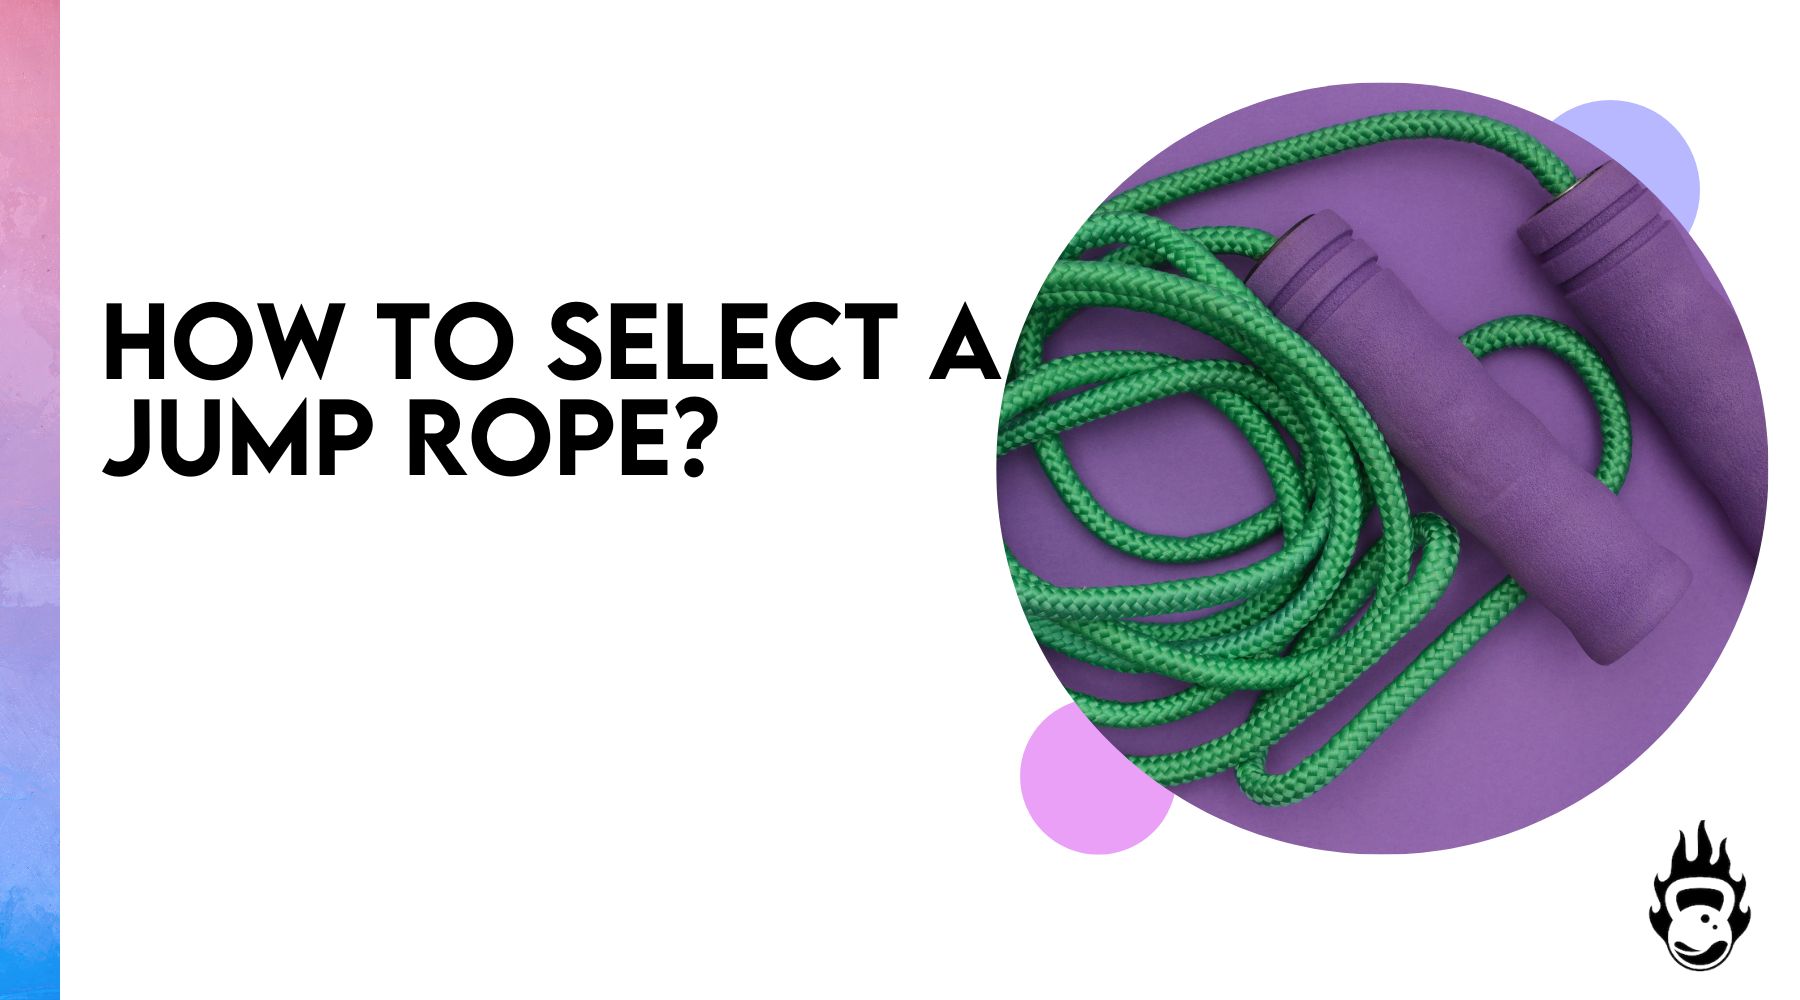 How to select a jump rope?